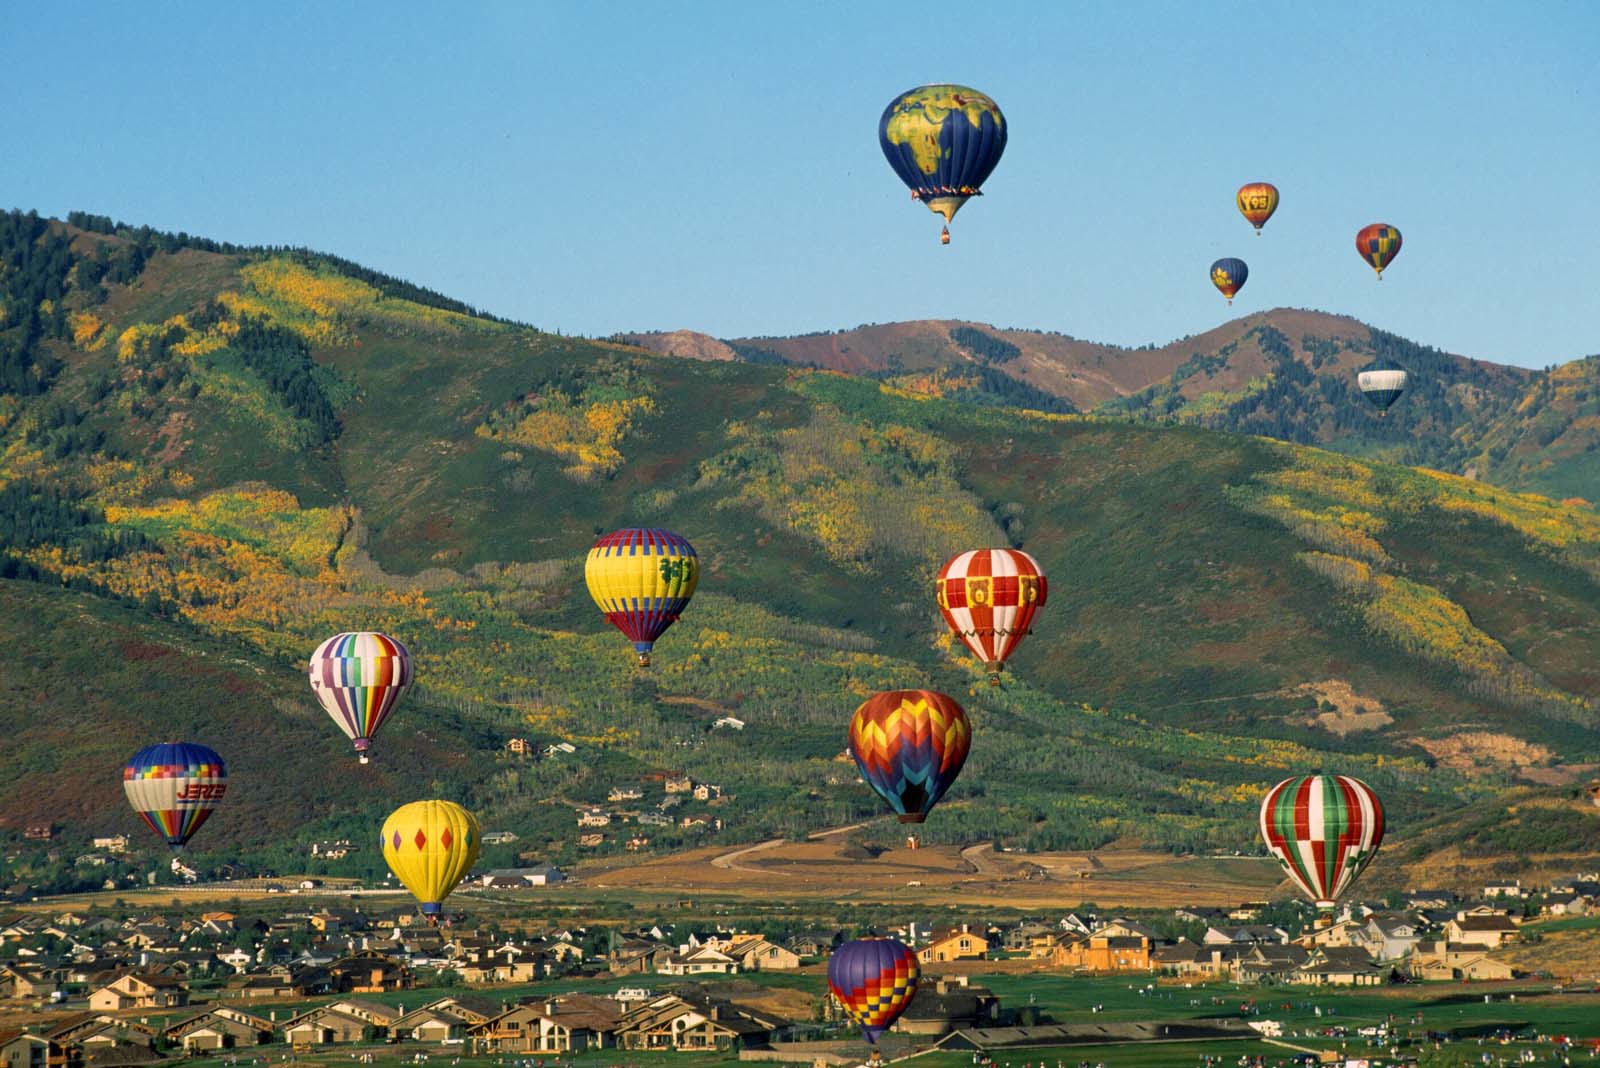 Taking Flight in a Hot Air Balloon Ride over Park City ...